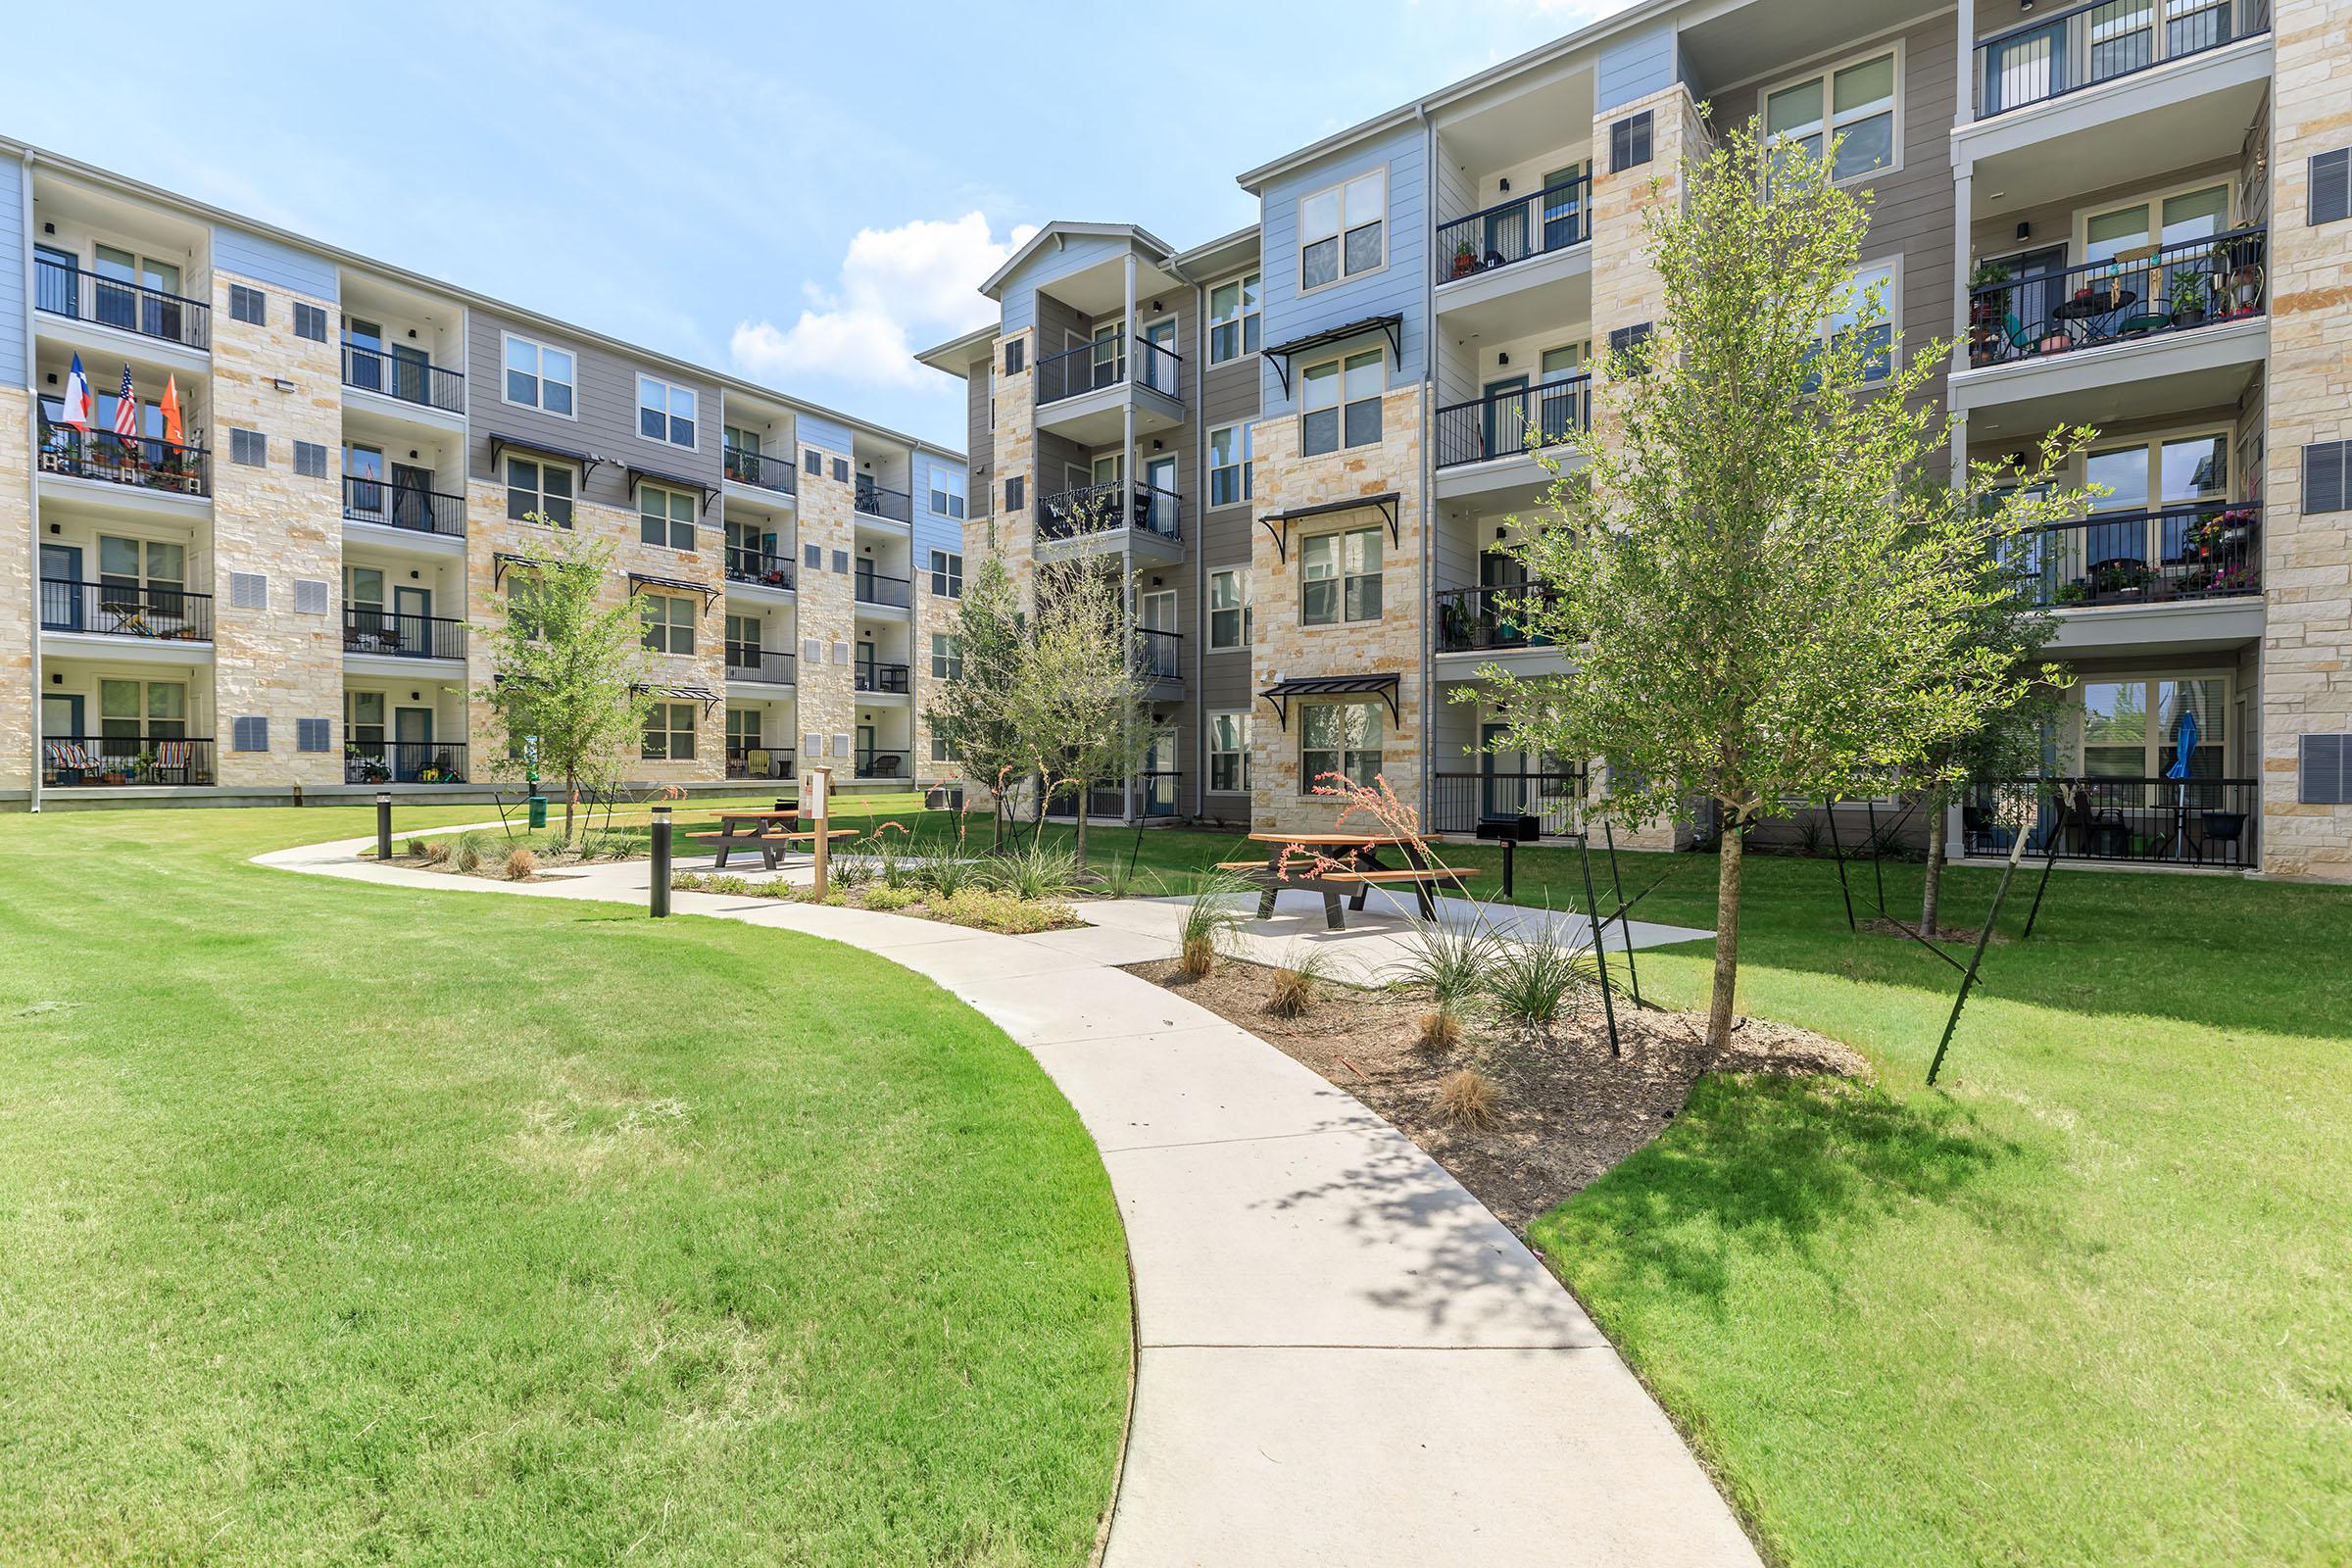 Senior Apartments in Pflugerville - Legacy Ranch at Dessau East - Grassy Lawn and Building Exterior